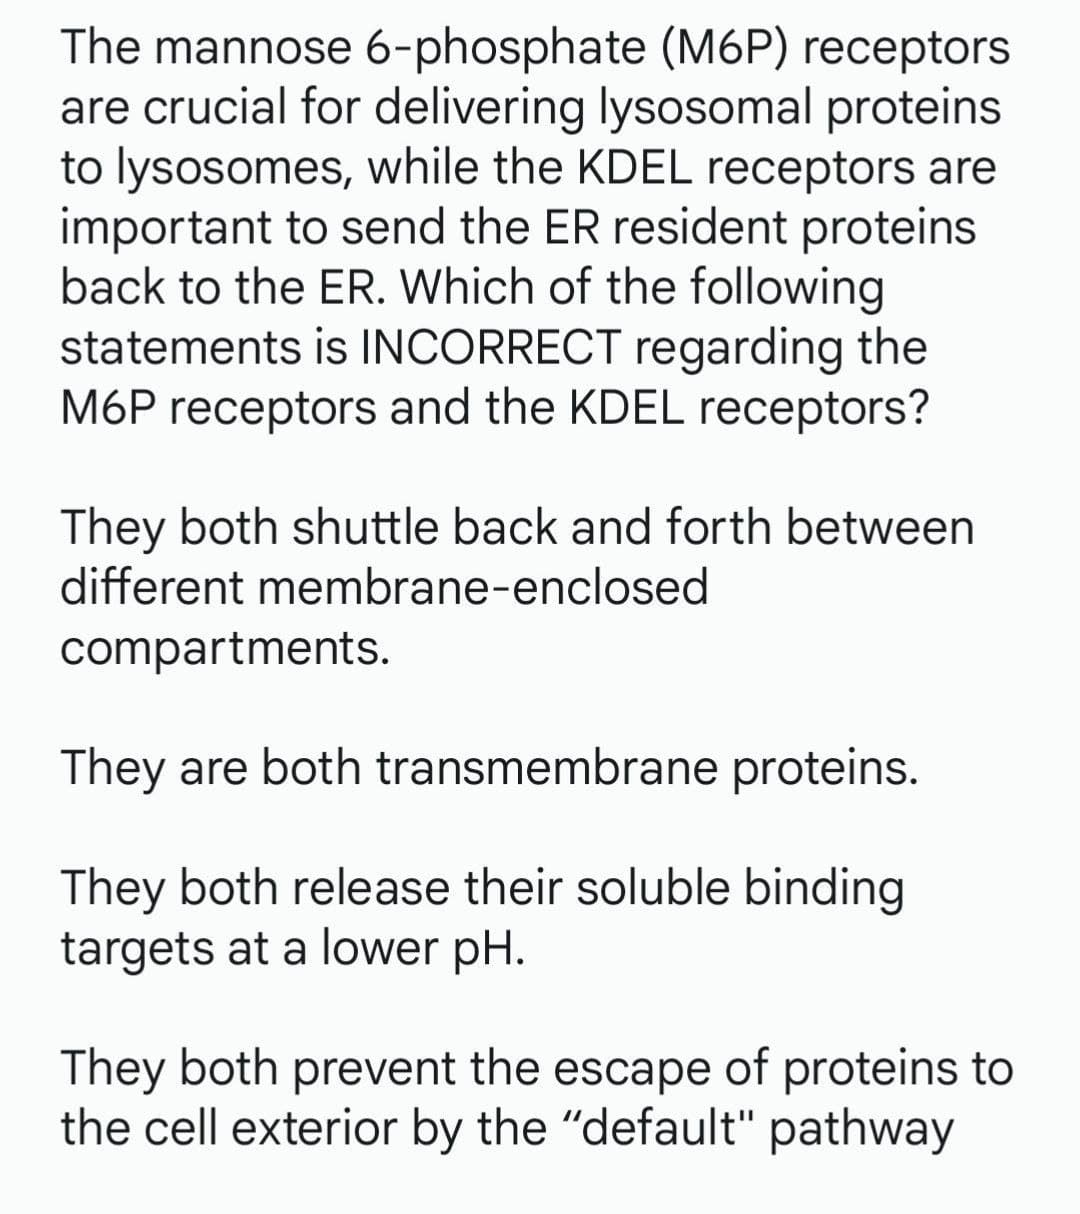 The mannose 6-phosphate (M6P) receptors
are crucial for delivering lysosomal proteins
to lysosomes, while the KDEL receptors are
important to send the ER resident proteins
back to the ER. Which of the following
statements is INCORRECT regarding the
M6P receptors and the KDEL receptors?
They both shuttle back and forth between
different membrane-enclosed
compartments.
They are both transmembrane proteins.
They both release their soluble binding
targets at a lower pH.
They both prevent the escape of proteins to
the cell exterior by the "default" pathway
